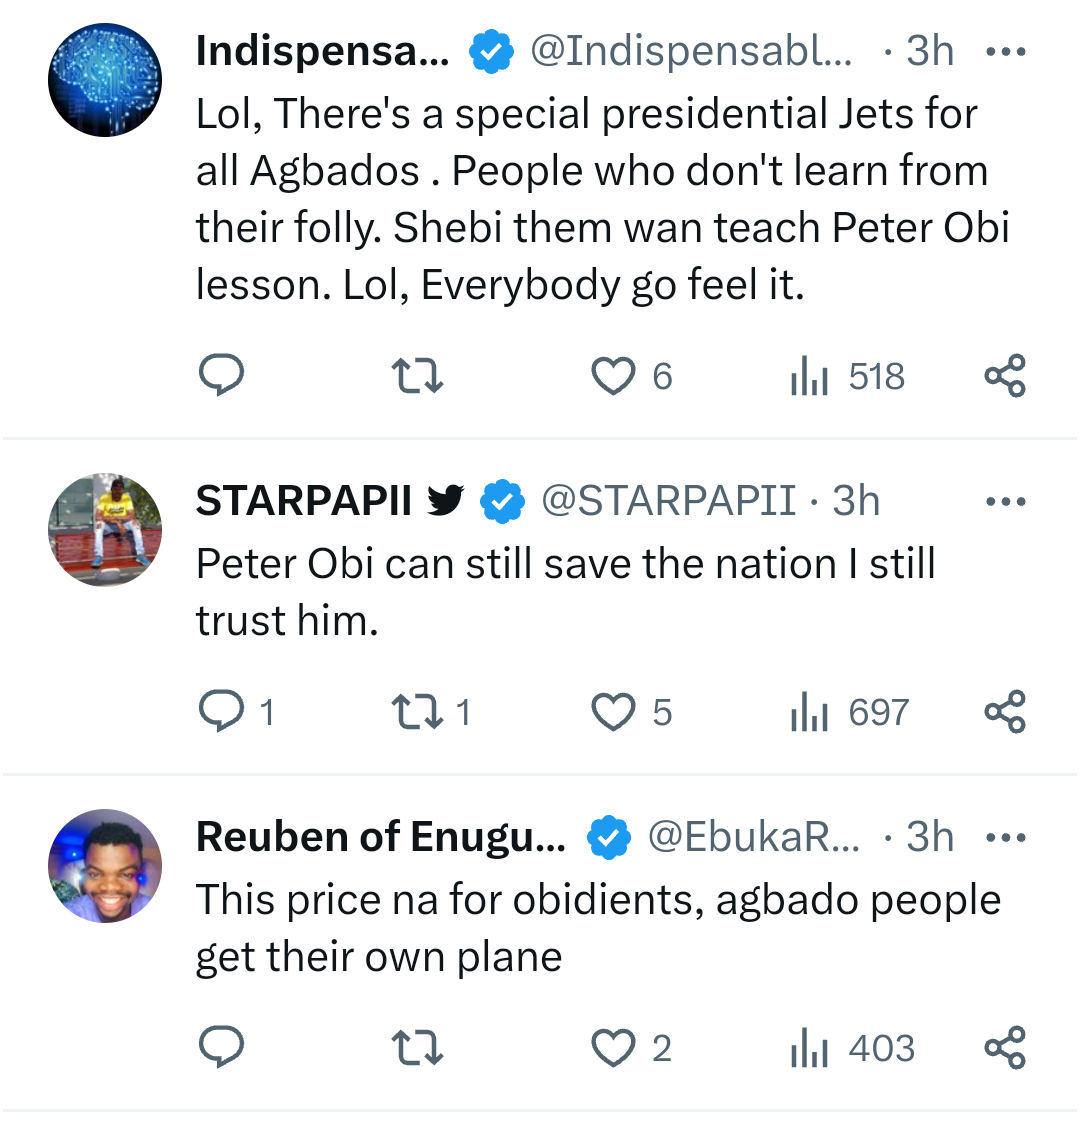 'Nigeria is gone' - Nigerians react after finding out one way ticket from Kano to Abuja is now N200k while Owerri to Abuja is 170k